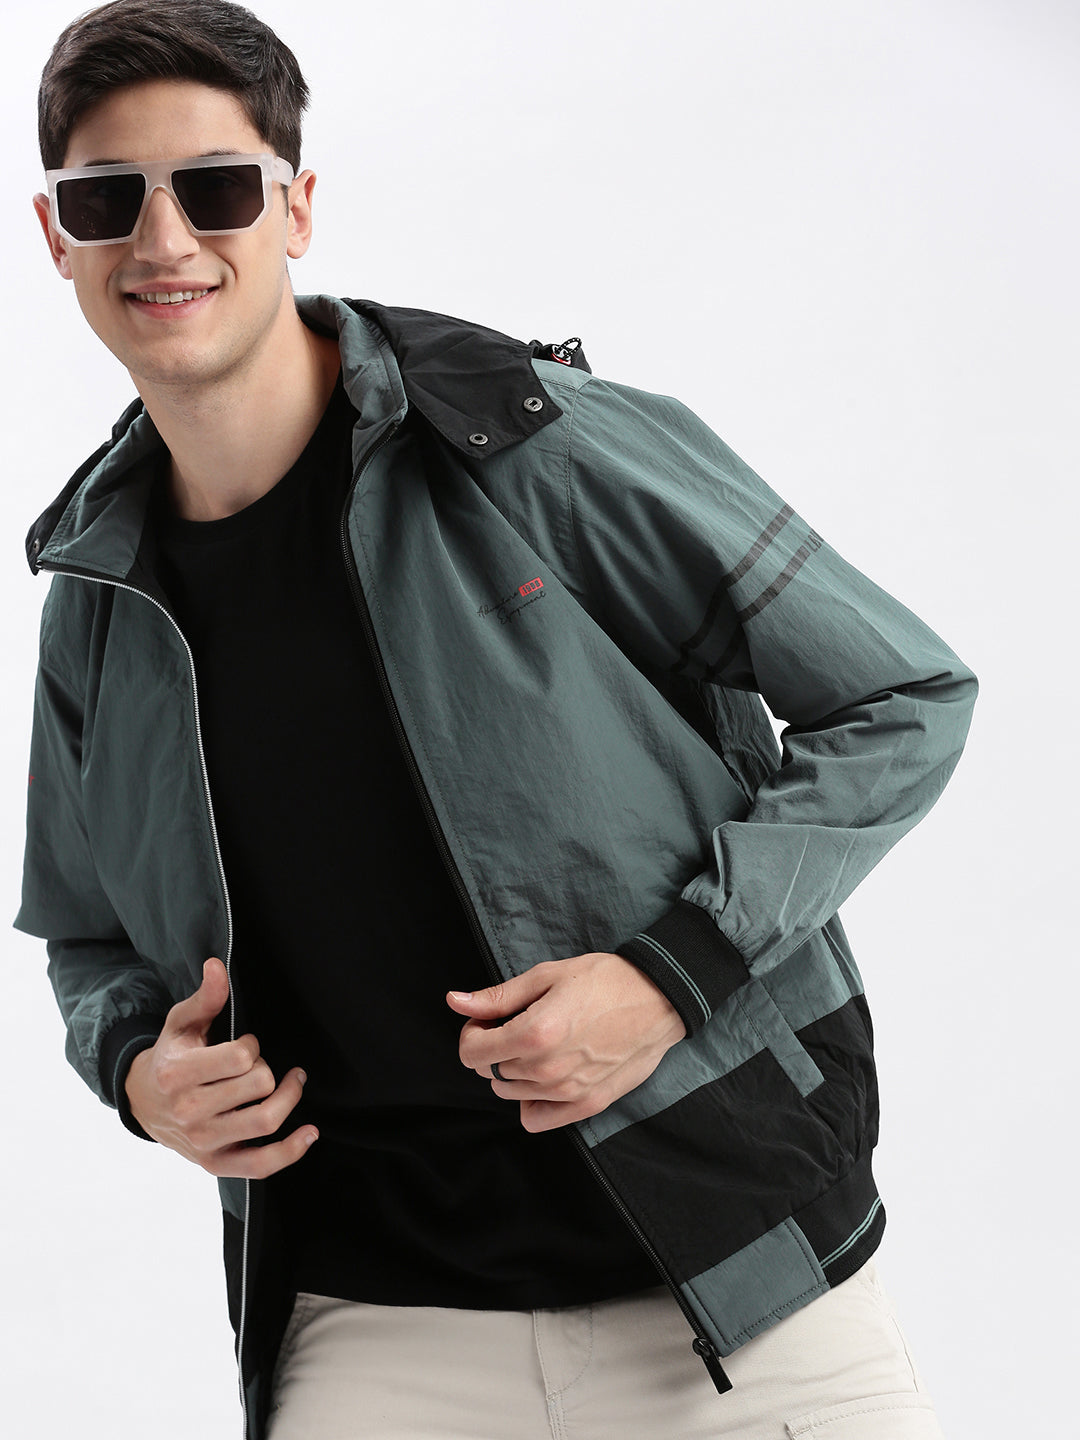 Men Colourblocked Mock Collar Teal Bomber Jacket Comes with Detachable Hoodie